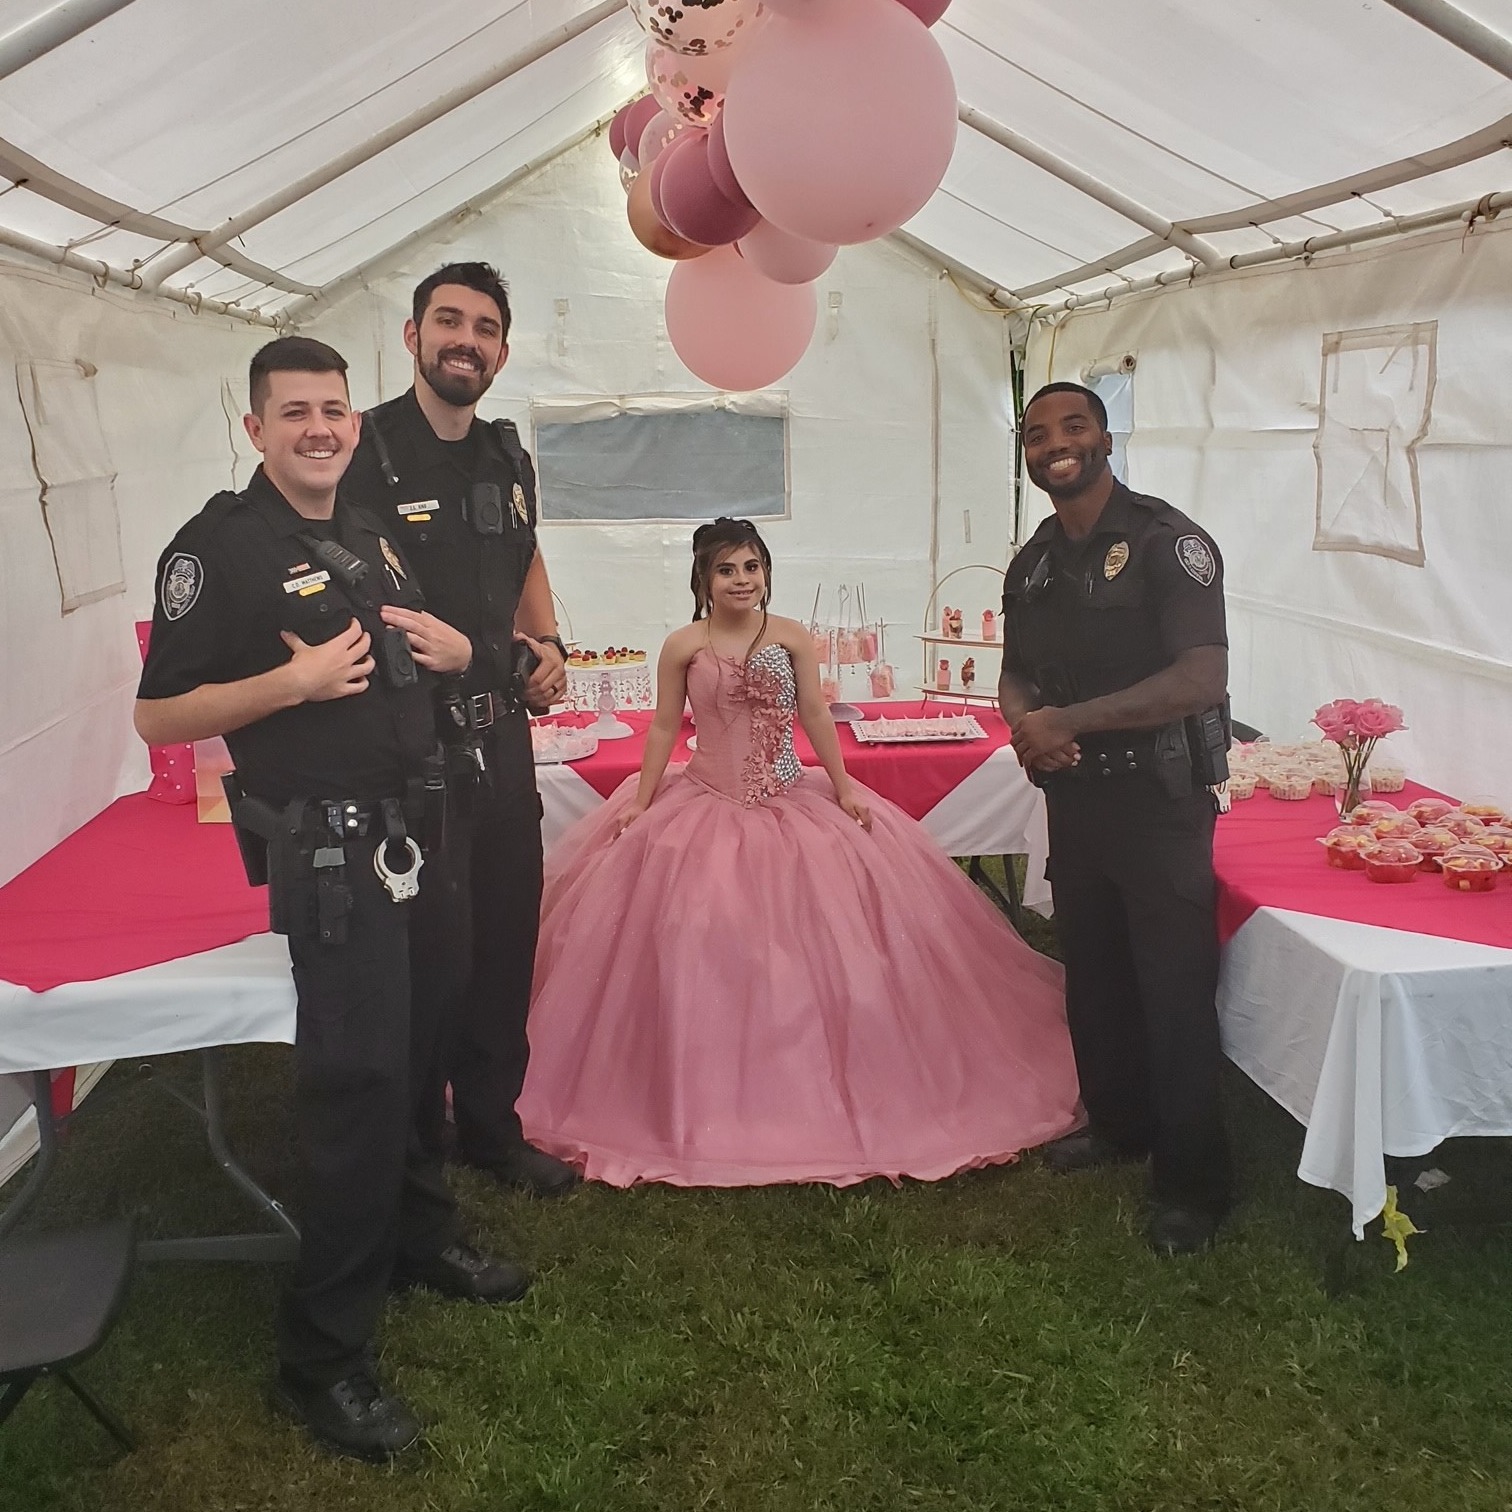 greensboro police department officers smiling and standing next to the quinceaÃ±era